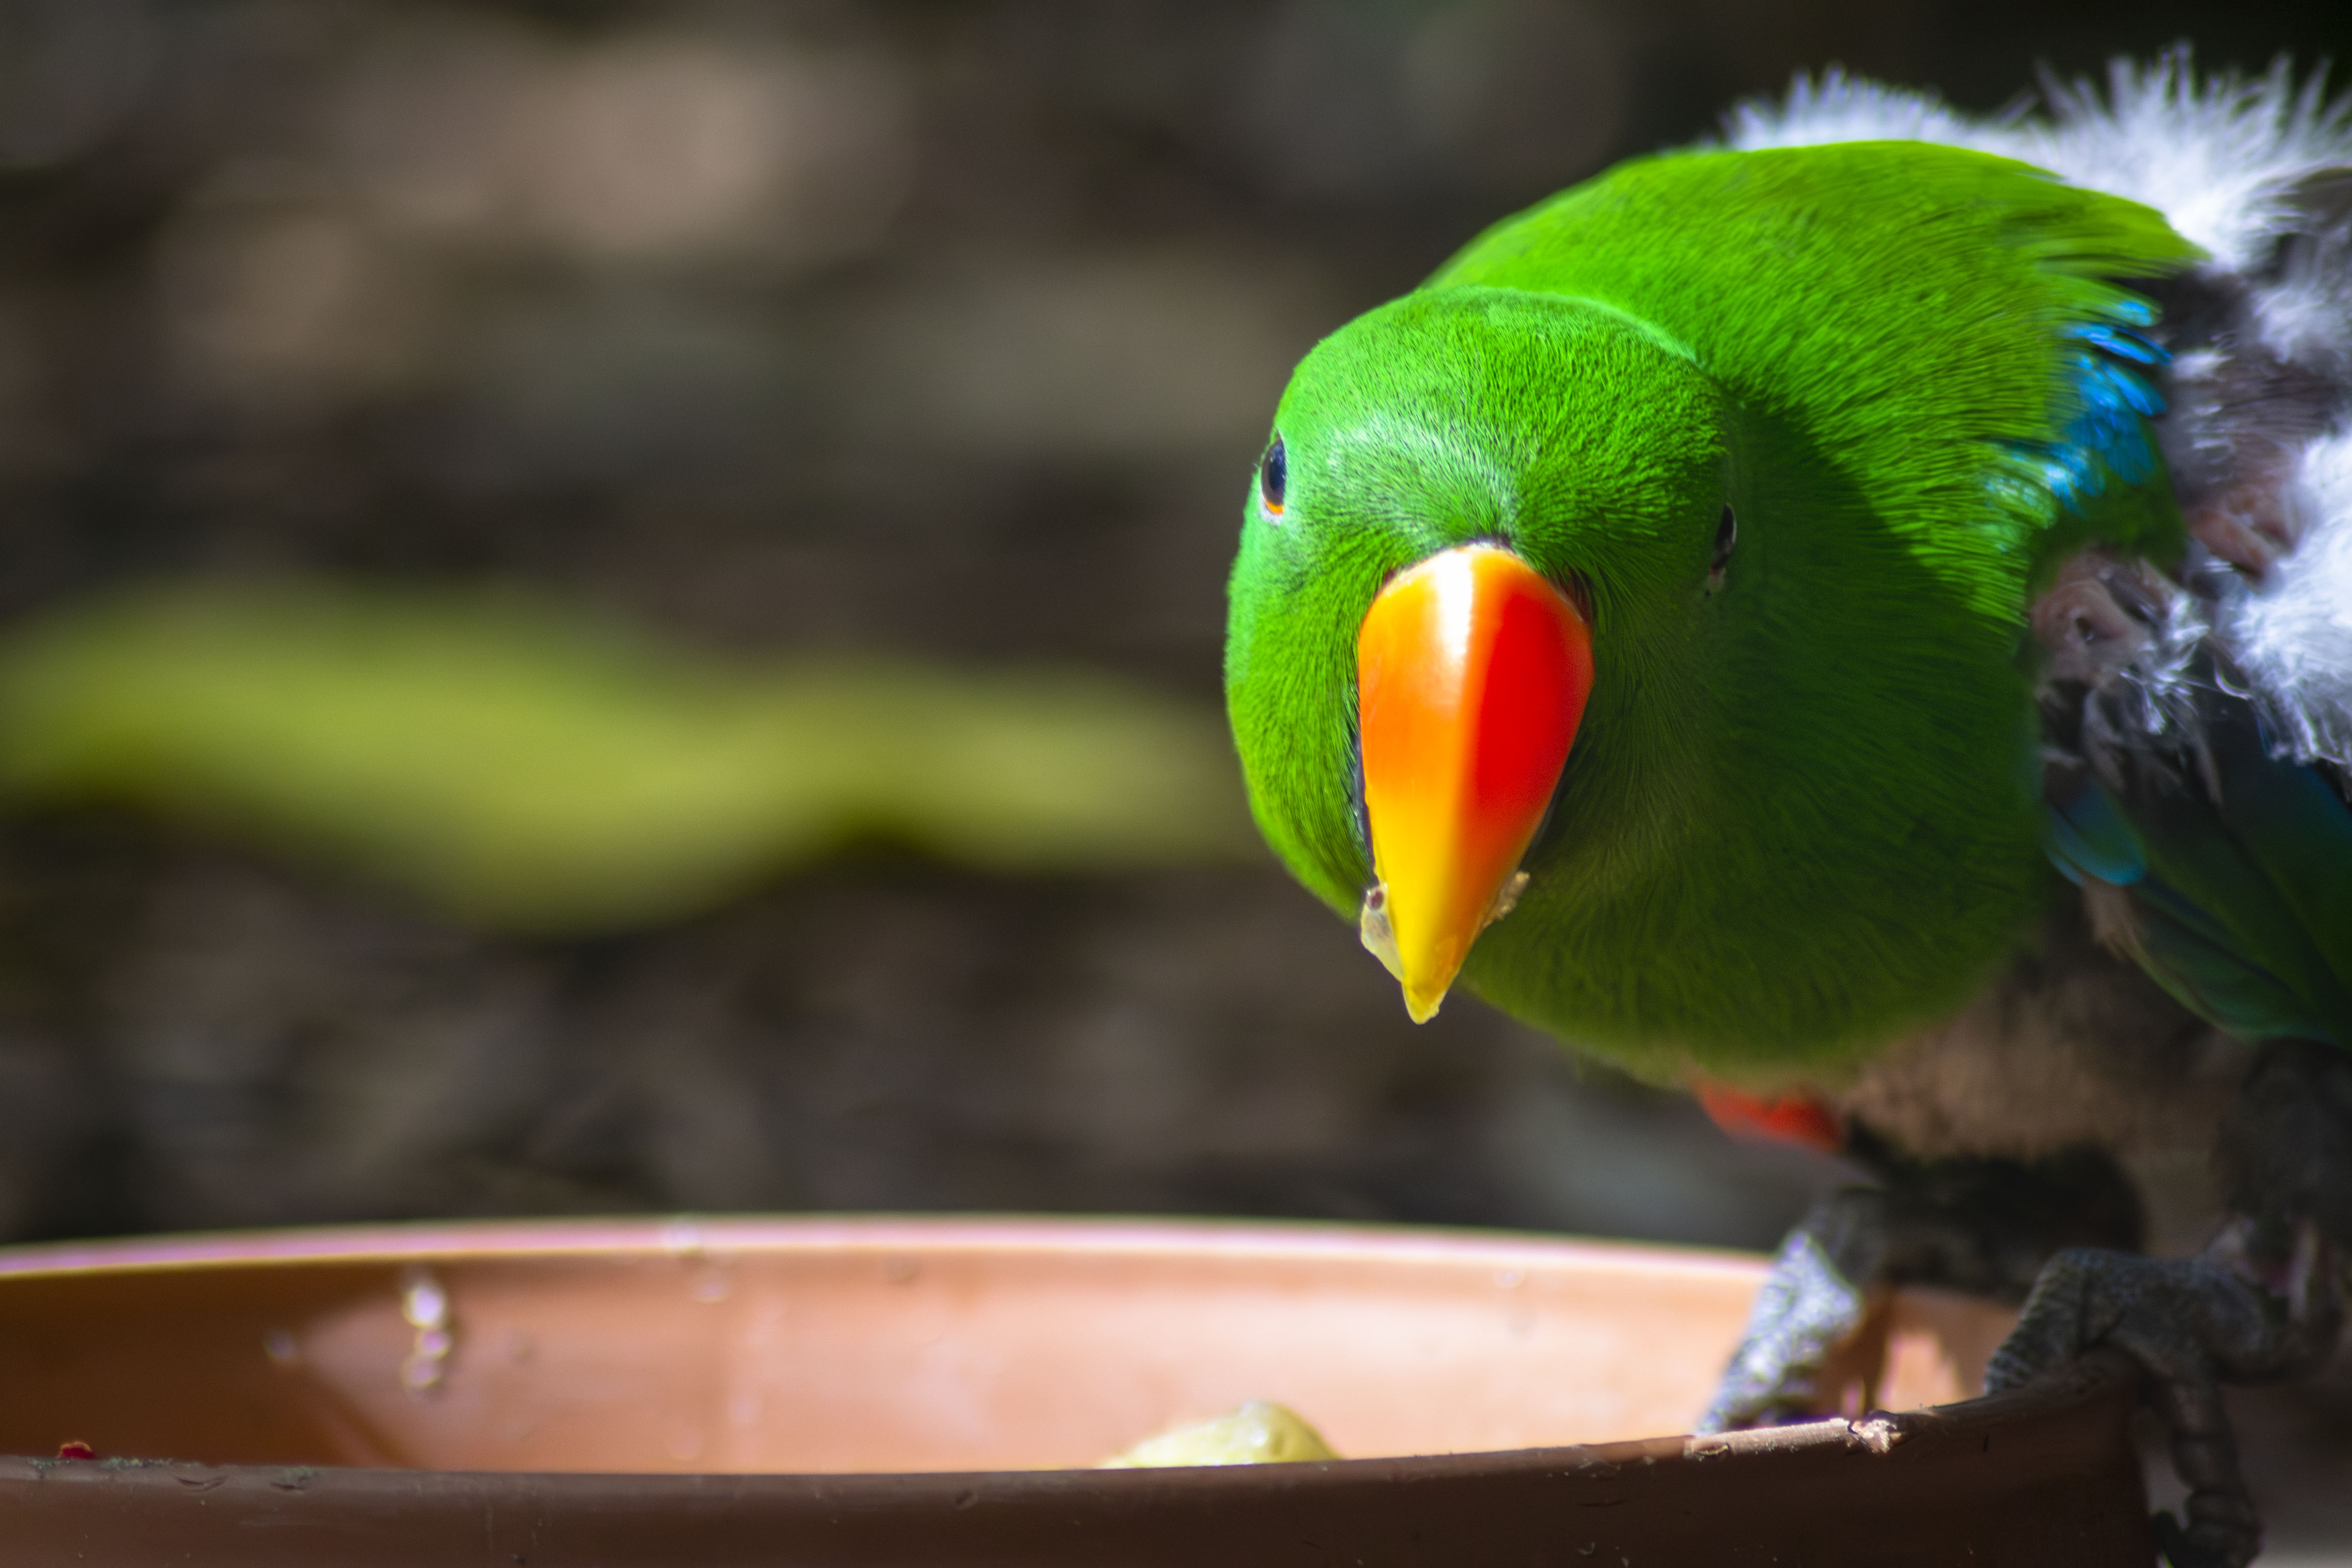 A parrot starring head-on at the camera--green feathers and orange/yellow beak.